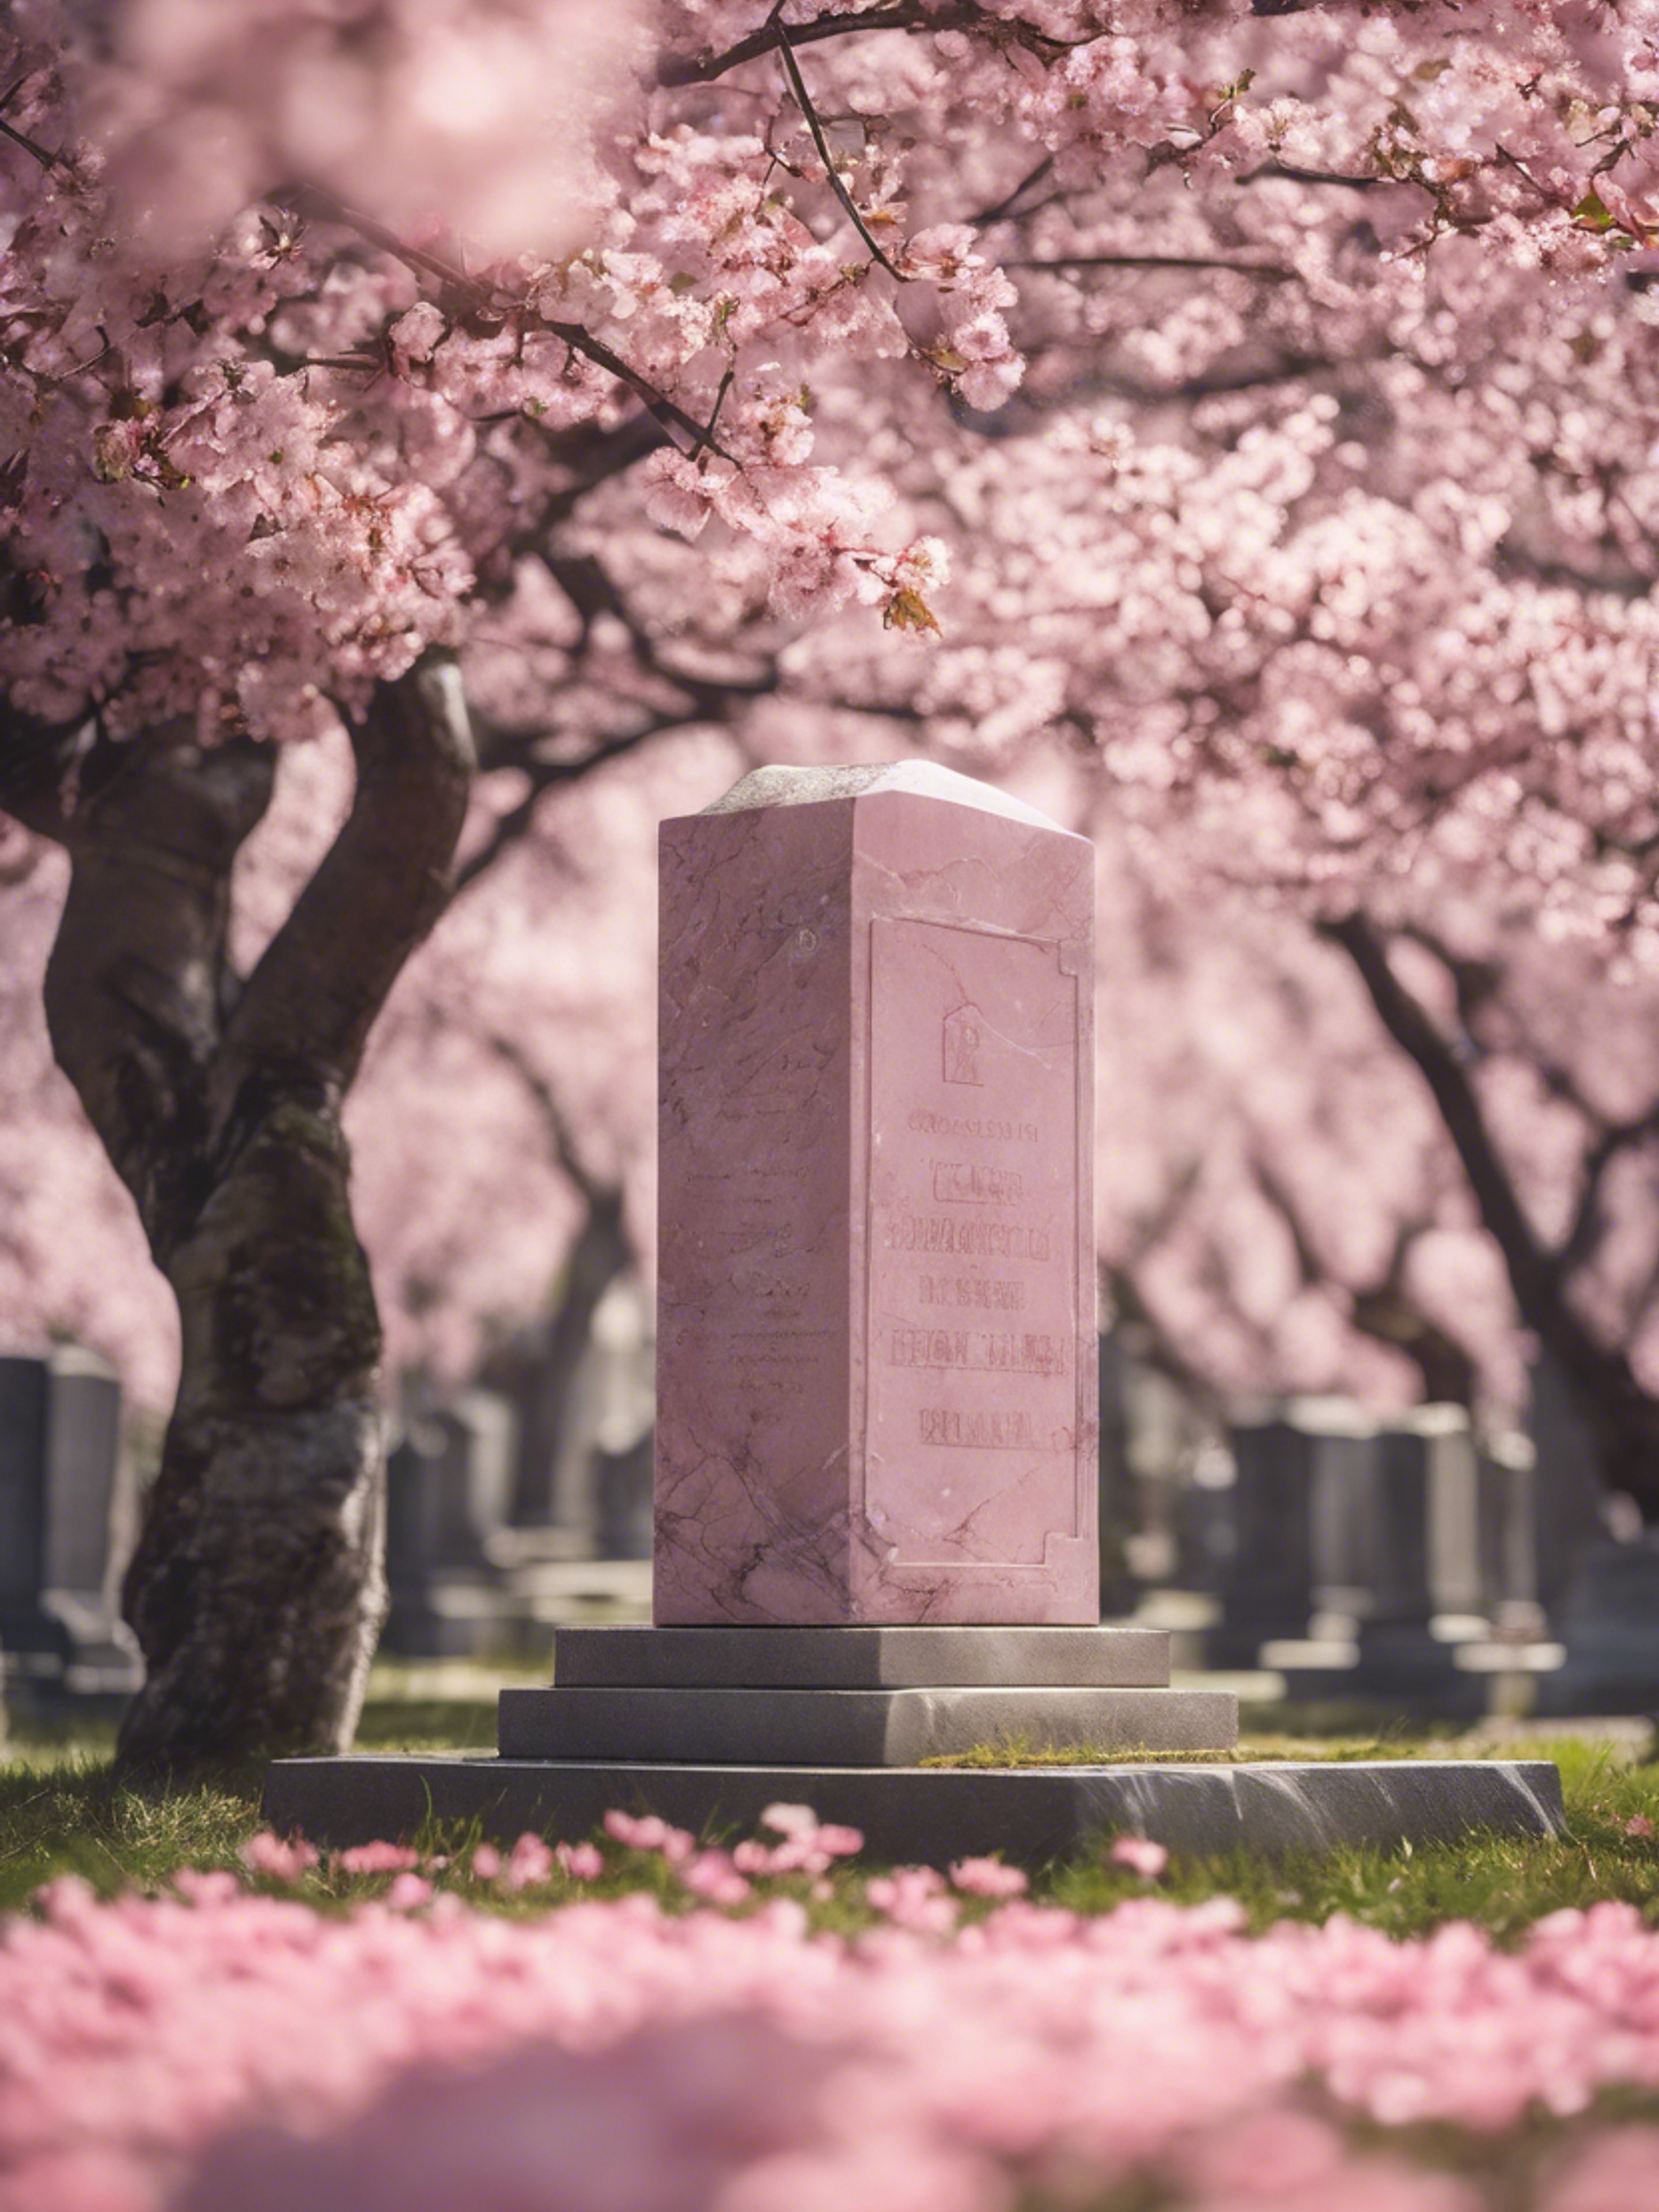 Pink marble headstone surrounded by blooming cherry blossom trees in a tranquil cemetery. Papel de parede[6605d21f56504ecfad88]